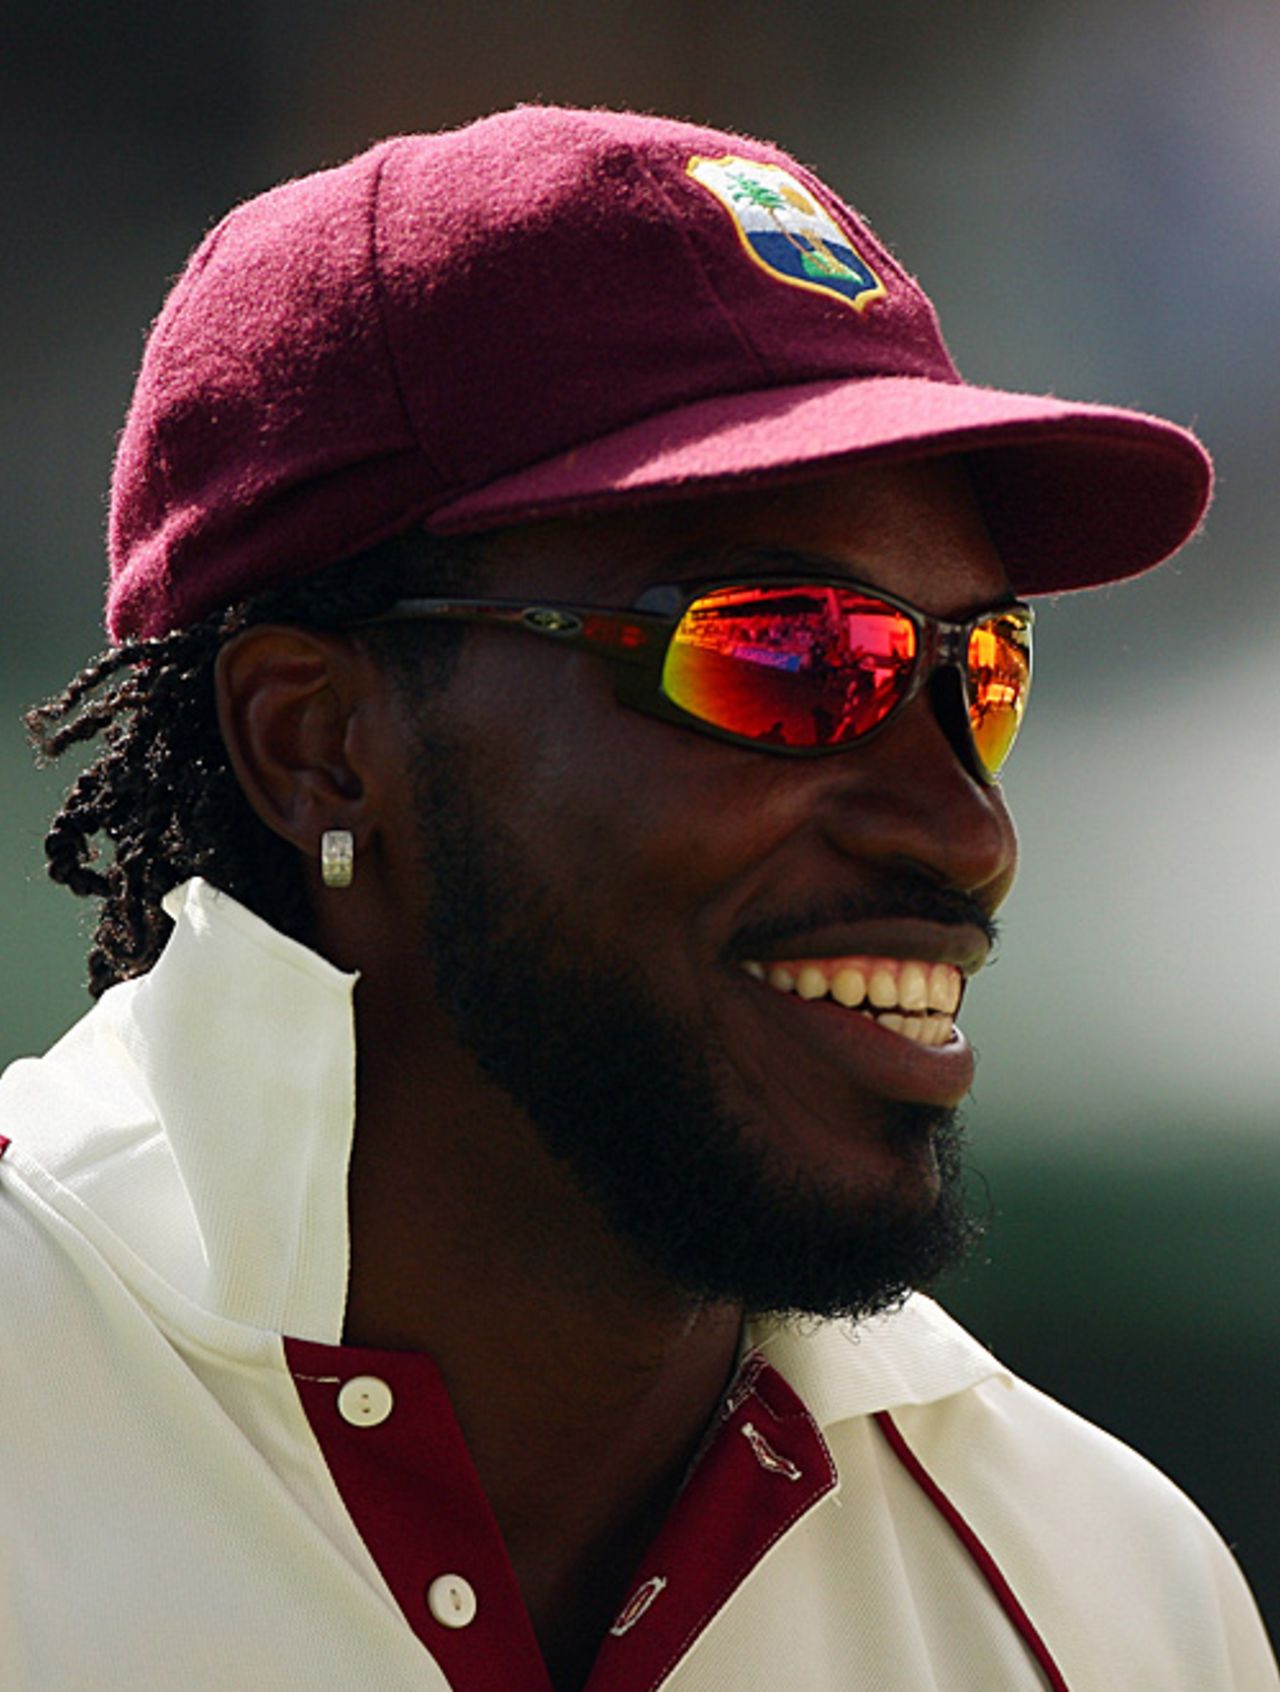 A profile of the West Indies captain Chris Gayle after England were rolled for 51, West Indies v England, 1st Test, Kingston, February 7, 2009